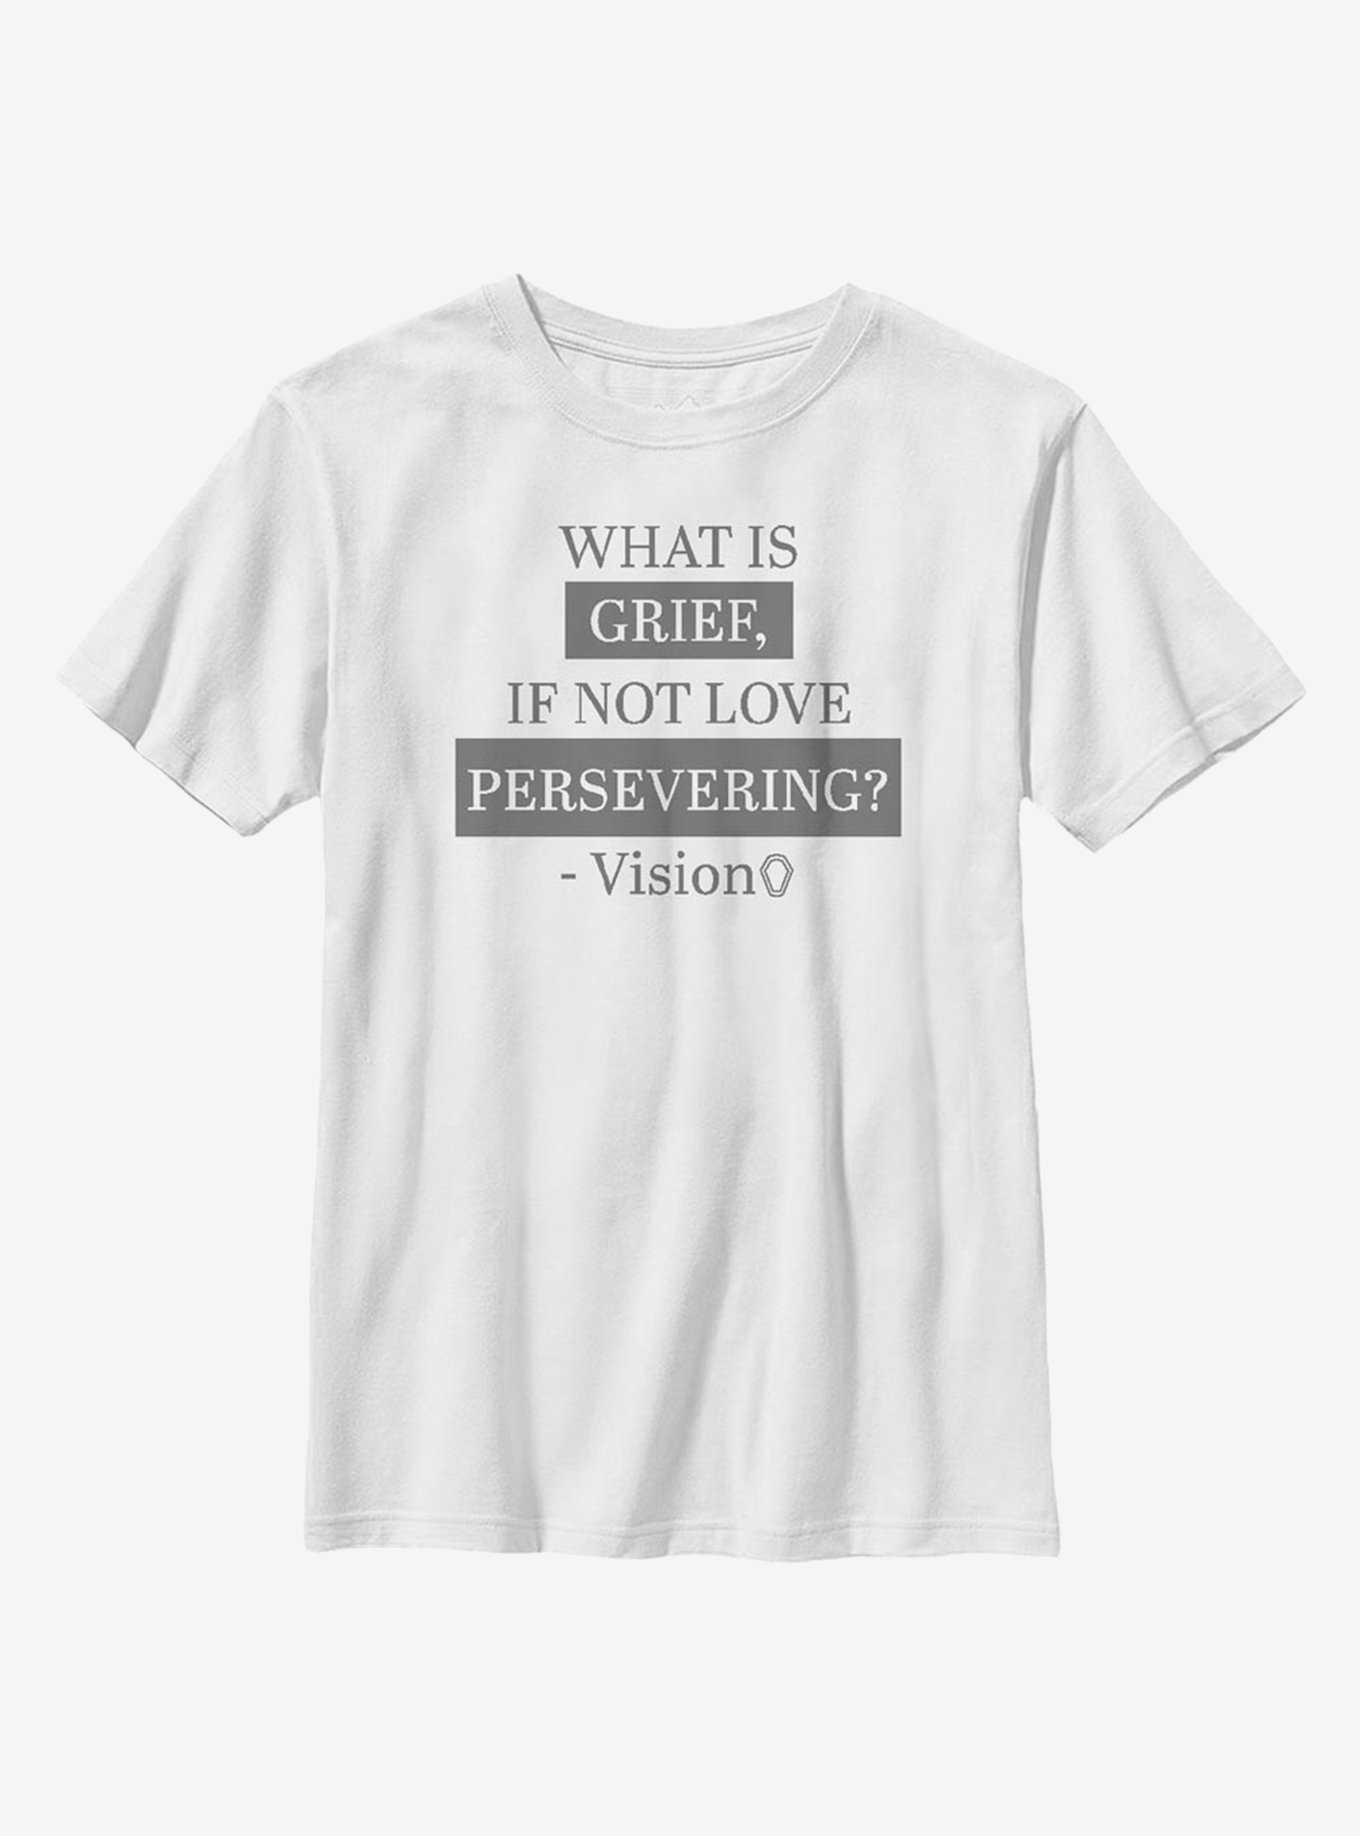 Marvel WandaVision Grief Is Love Persevering Youth T-Shirt, , hi-res